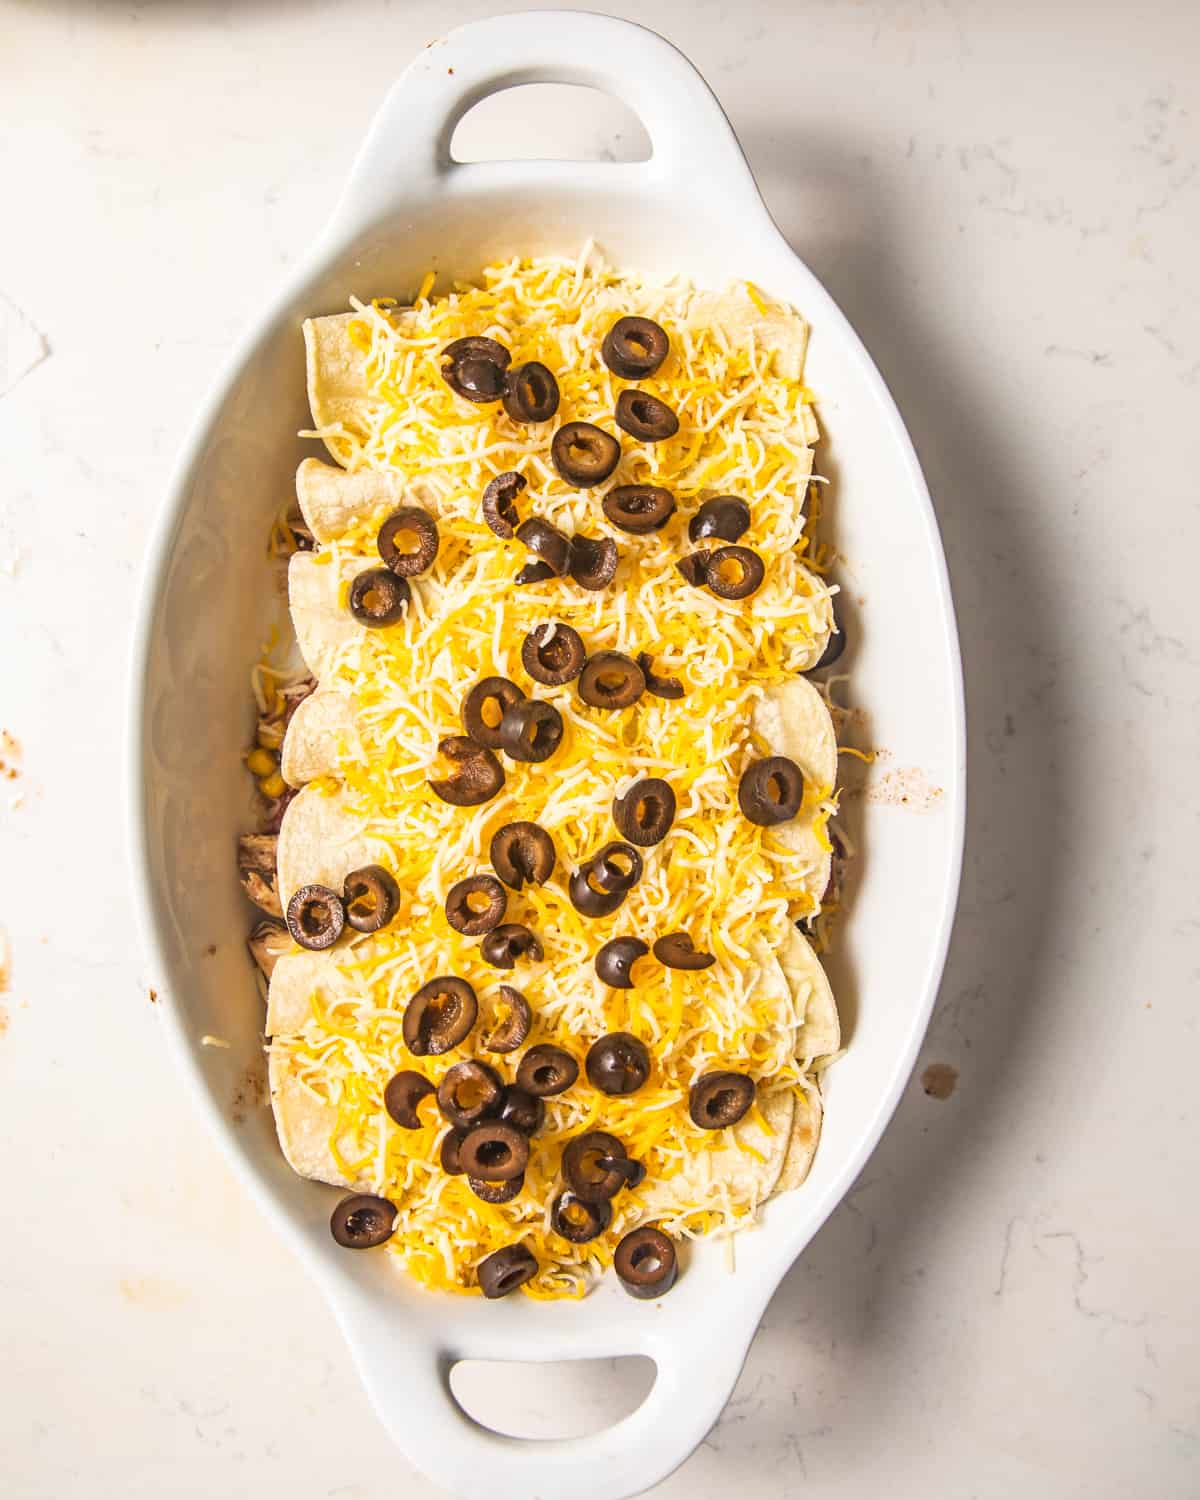 chicken enchiladas in a casserole dish topped with cheese and olives.